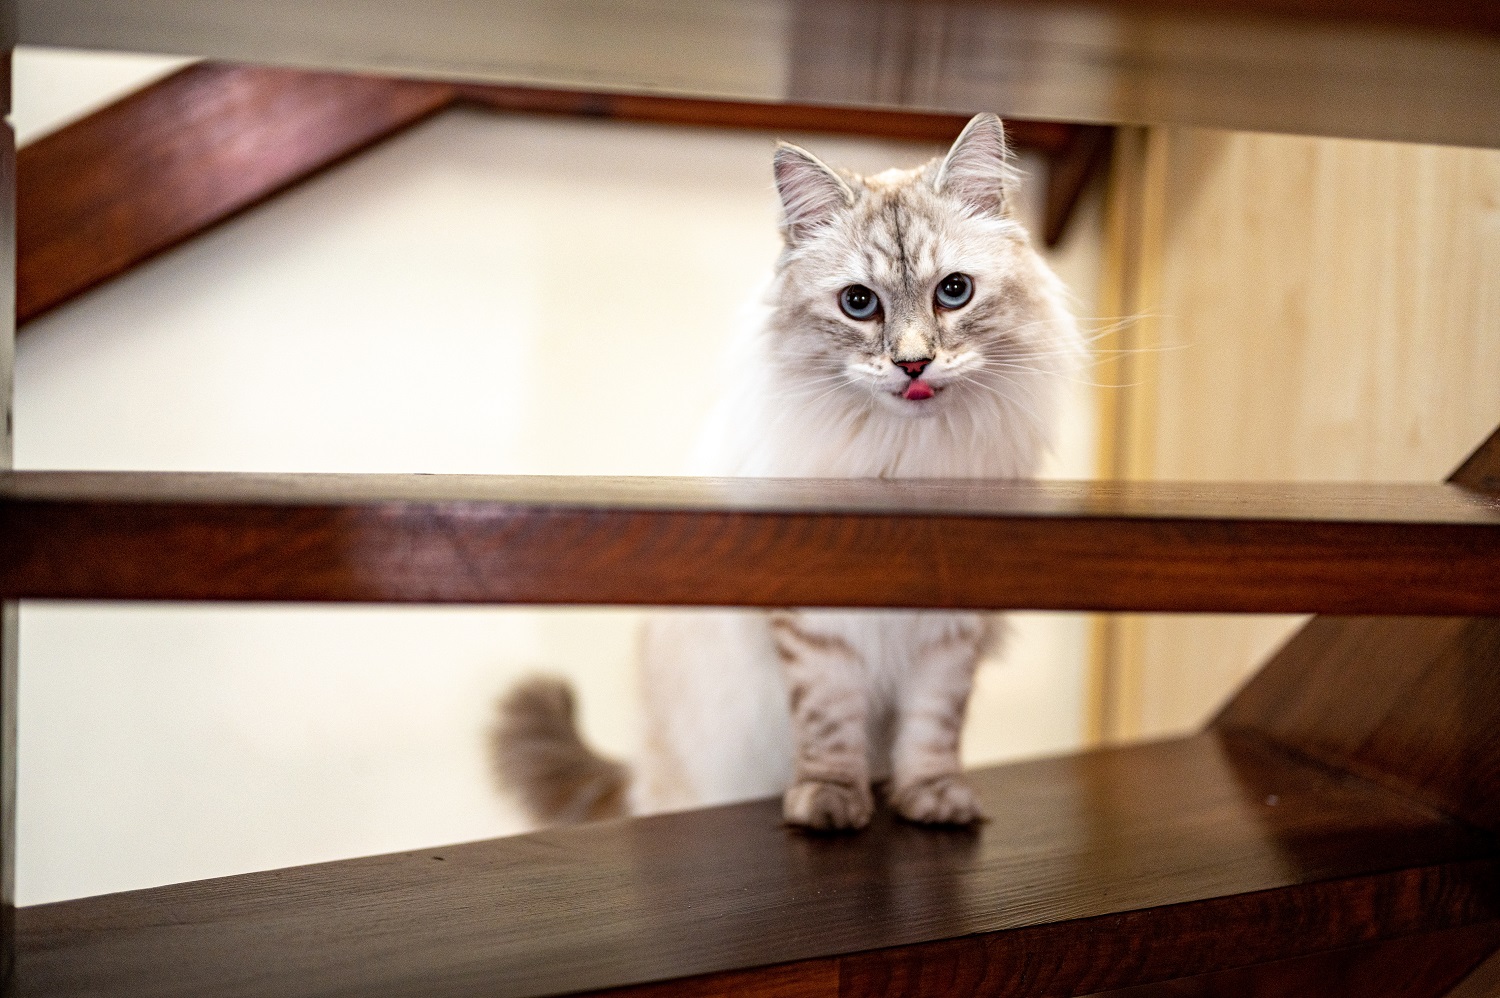 How to kitten-proof stairs